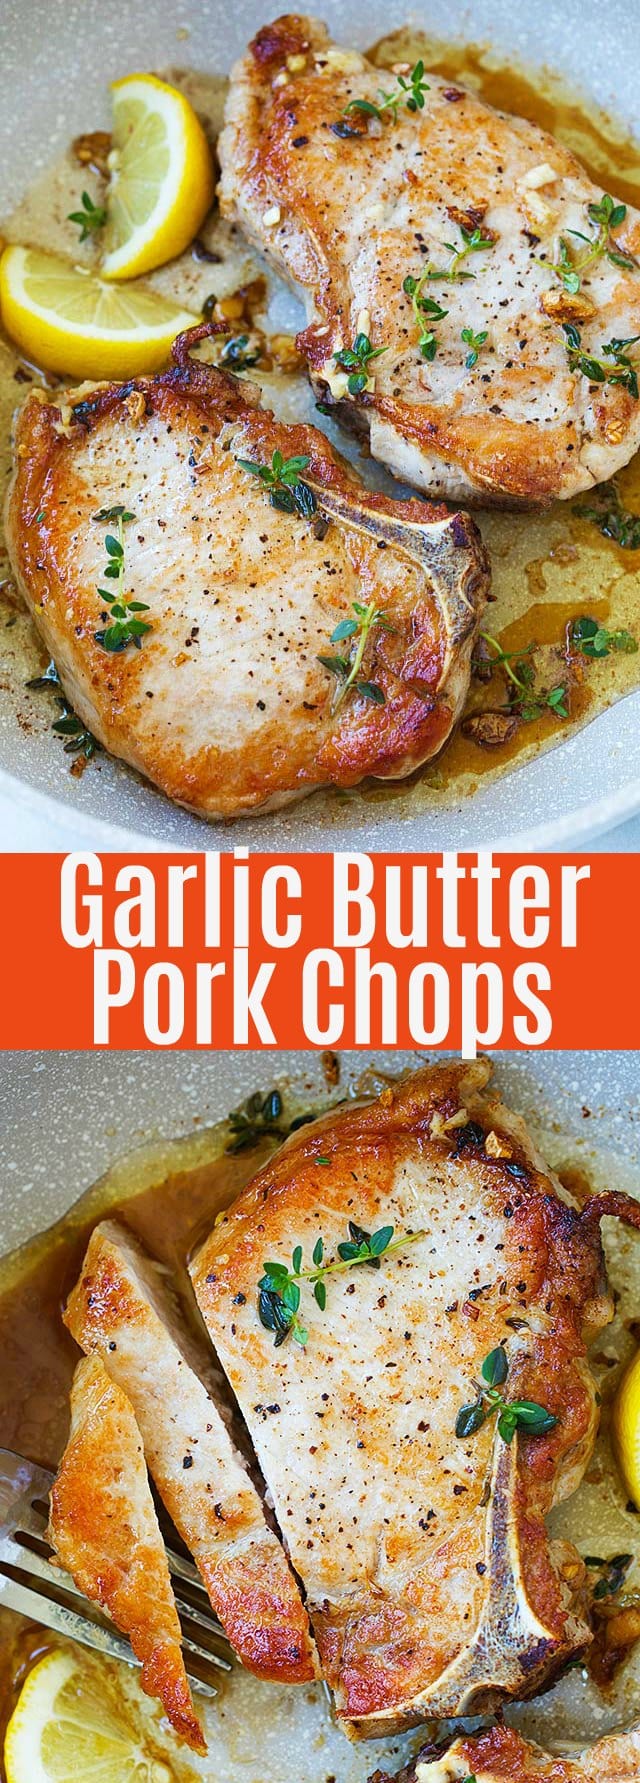 Garlic Butter Pork Chops - easy skillet pork chops seared with garlic butter & thyme. Juicy, tender and flavorful pork chops dinner is ready in 20 mins!